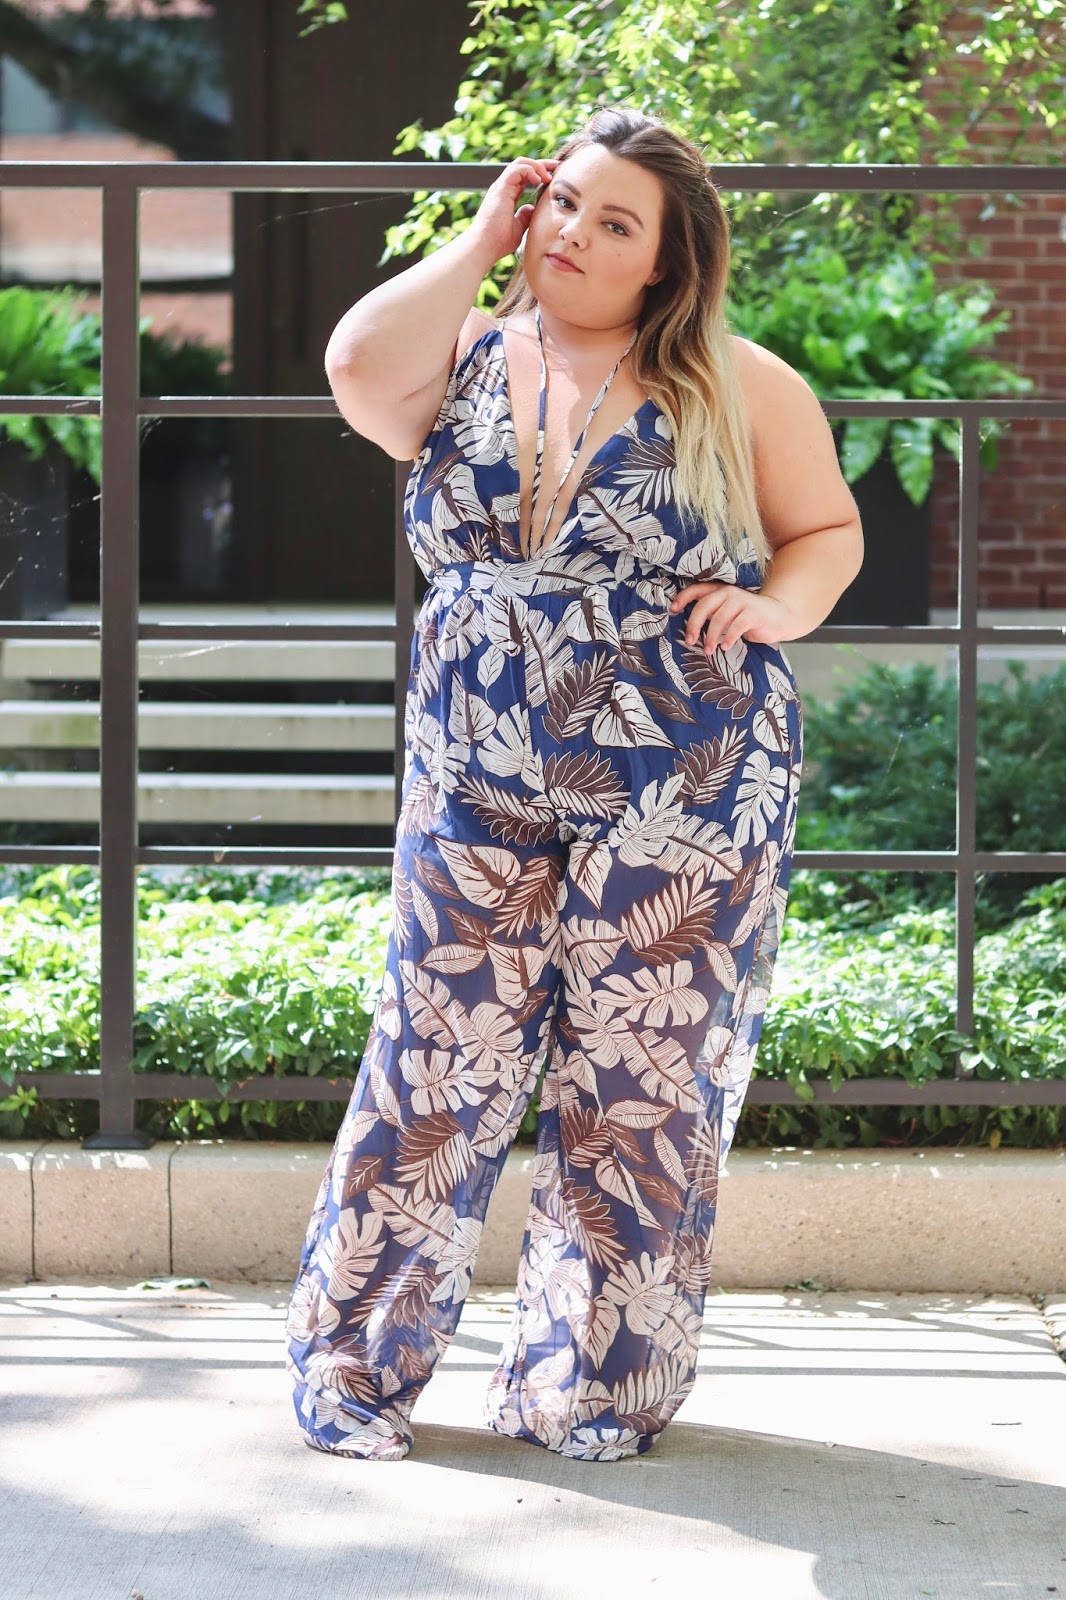 chicago plus size fashion blogger, plus size fashion blogger, fashion nova curve, fashion nova, blogger review, sexy jumpsuit, plus size clothing, affordable plus size clothes, plus size jumpsuits, natalie craig, Natalie in the city, curves and confidence, full figured fashion, plus size, eff your body standards, embrace your curves